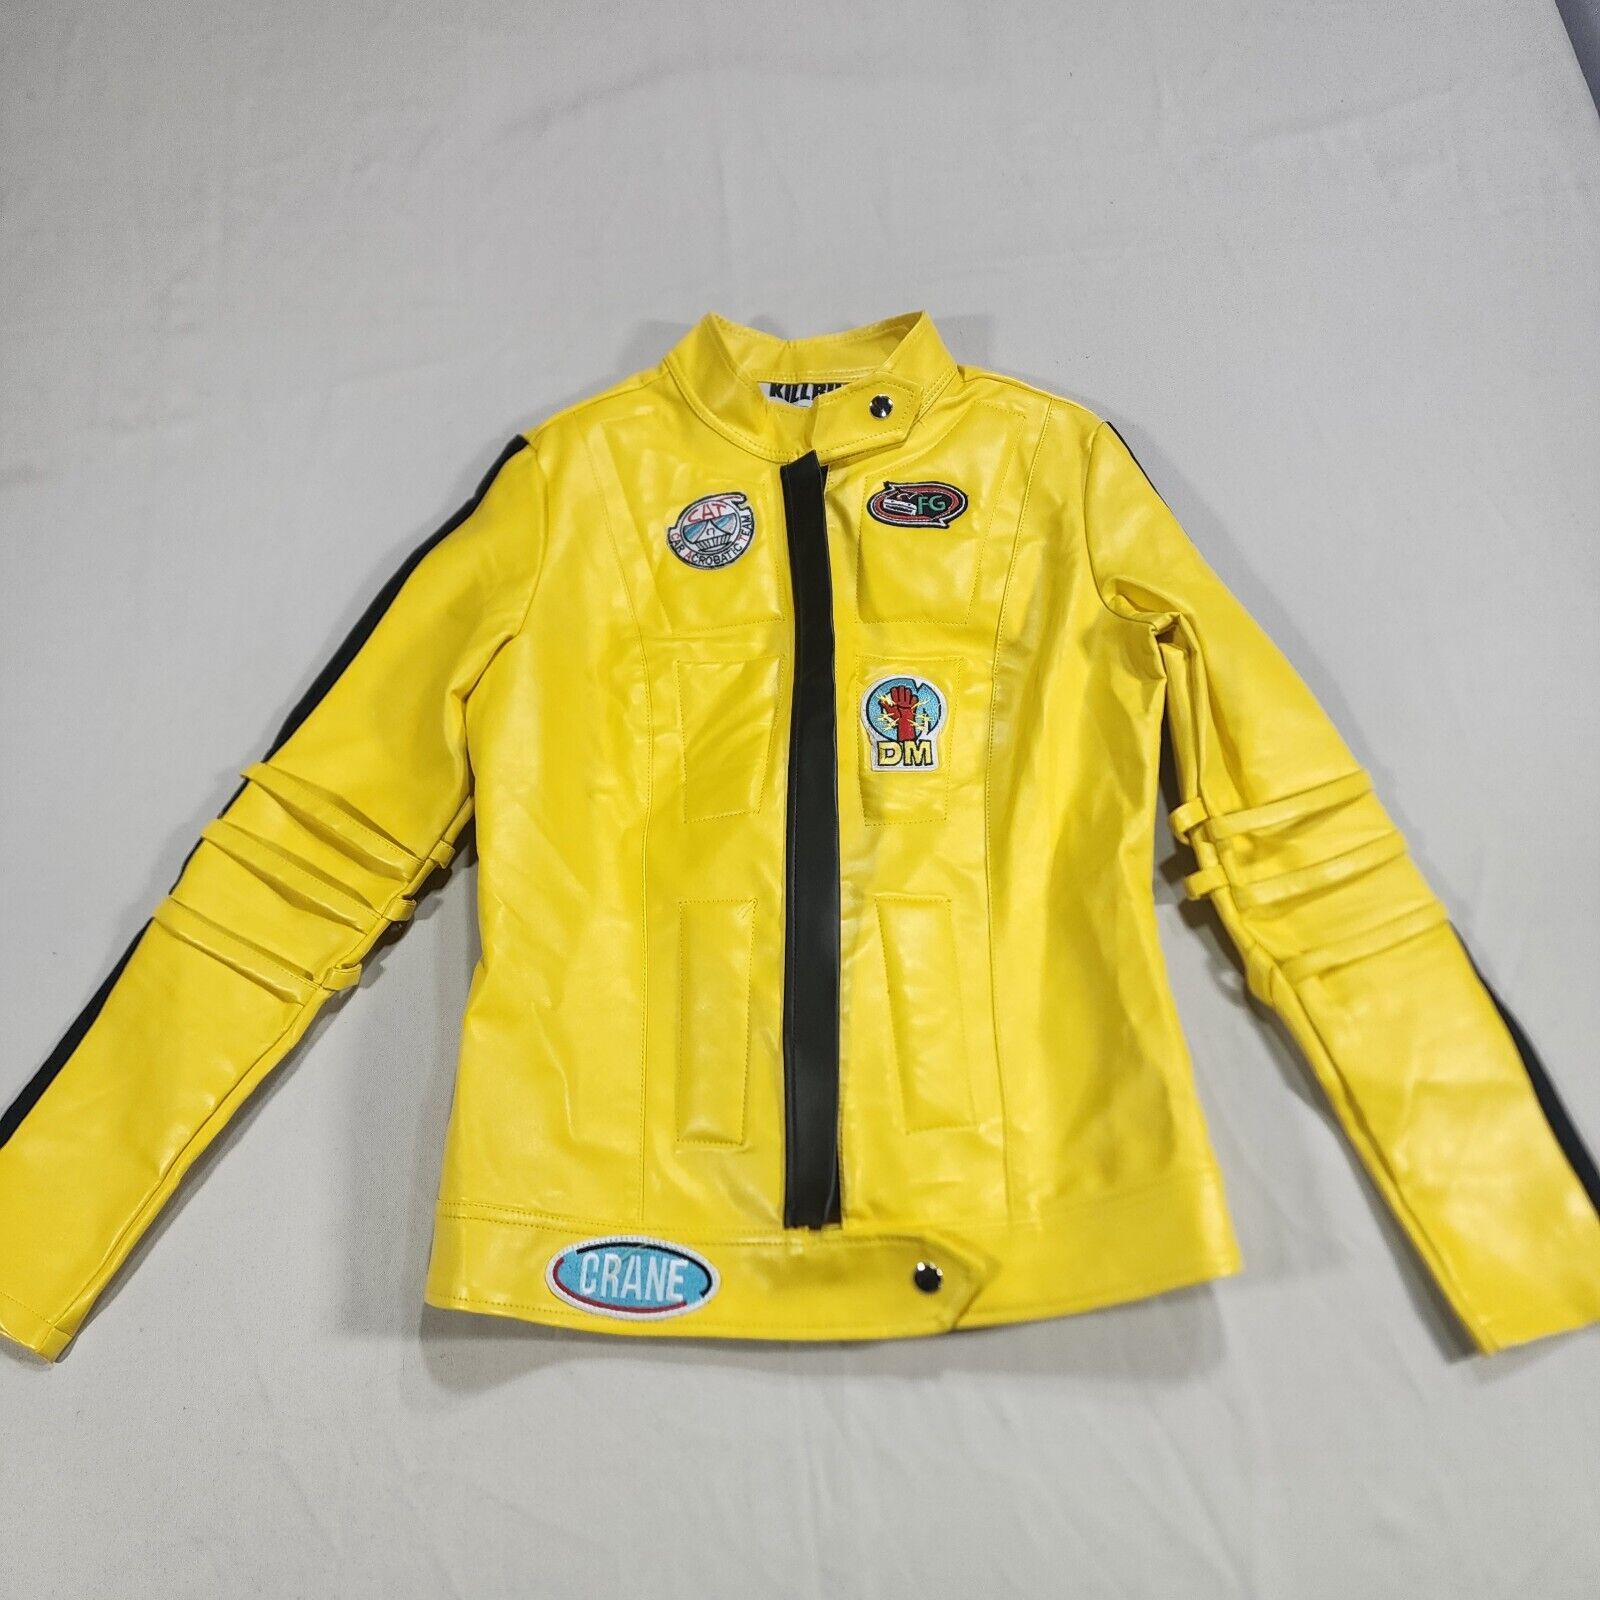 Kill Bill Yellow Polyester PVC Motorcycle Jacket Size Womens S Costume Cosplay